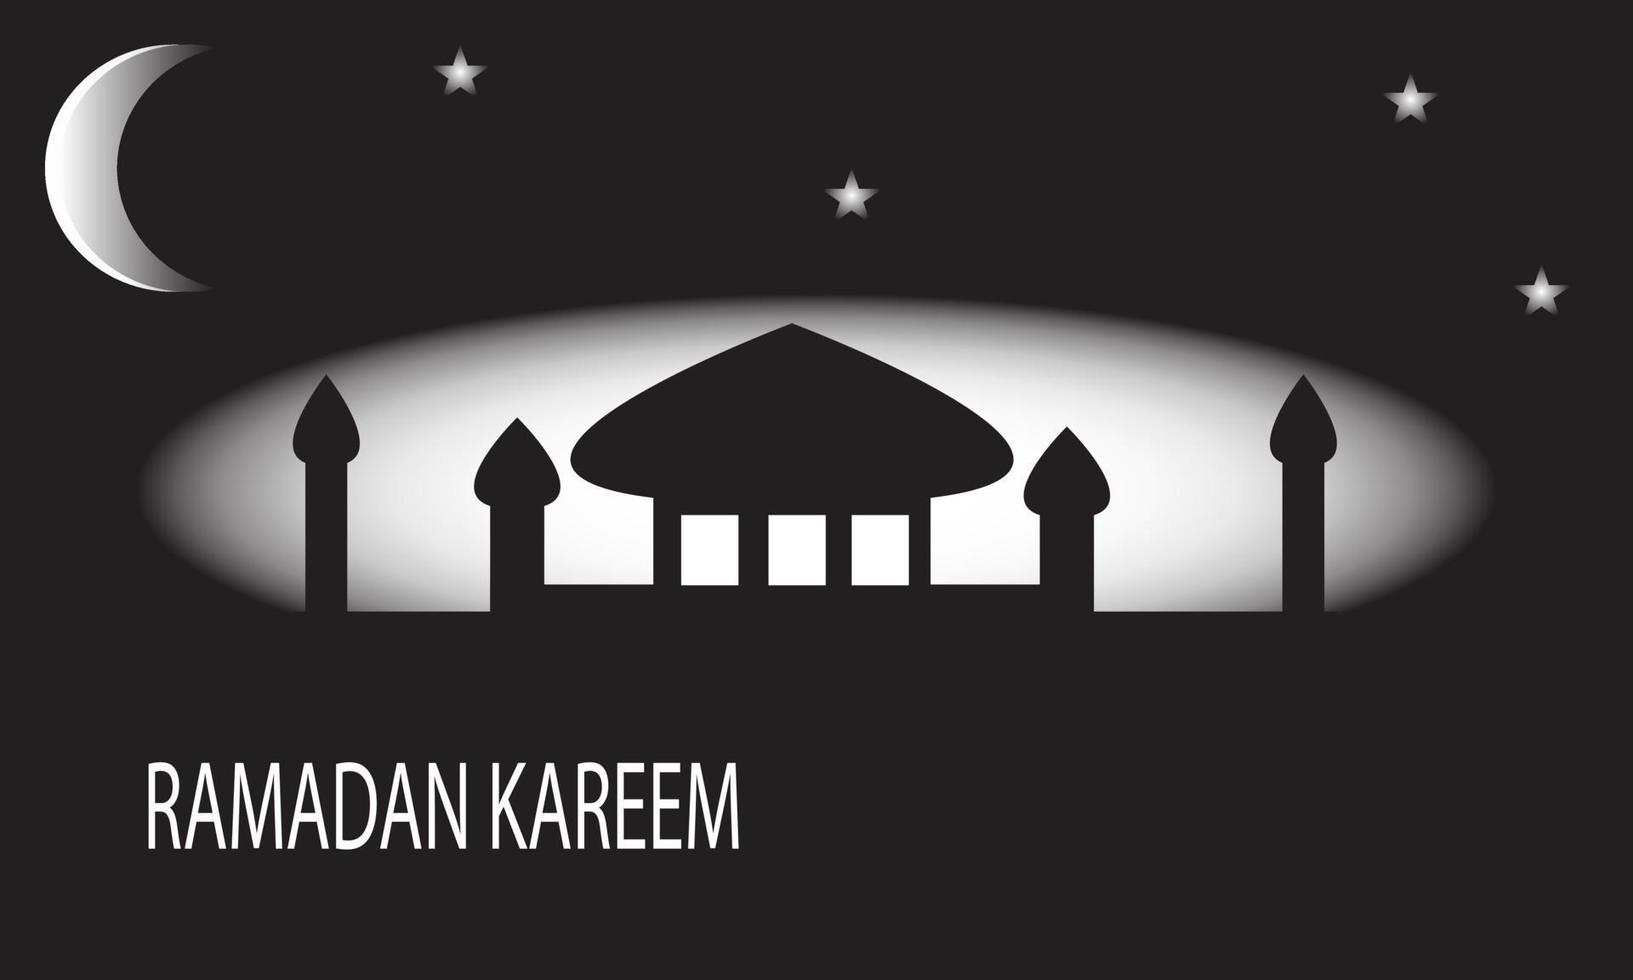 Ramadan greeting on black and white background vector